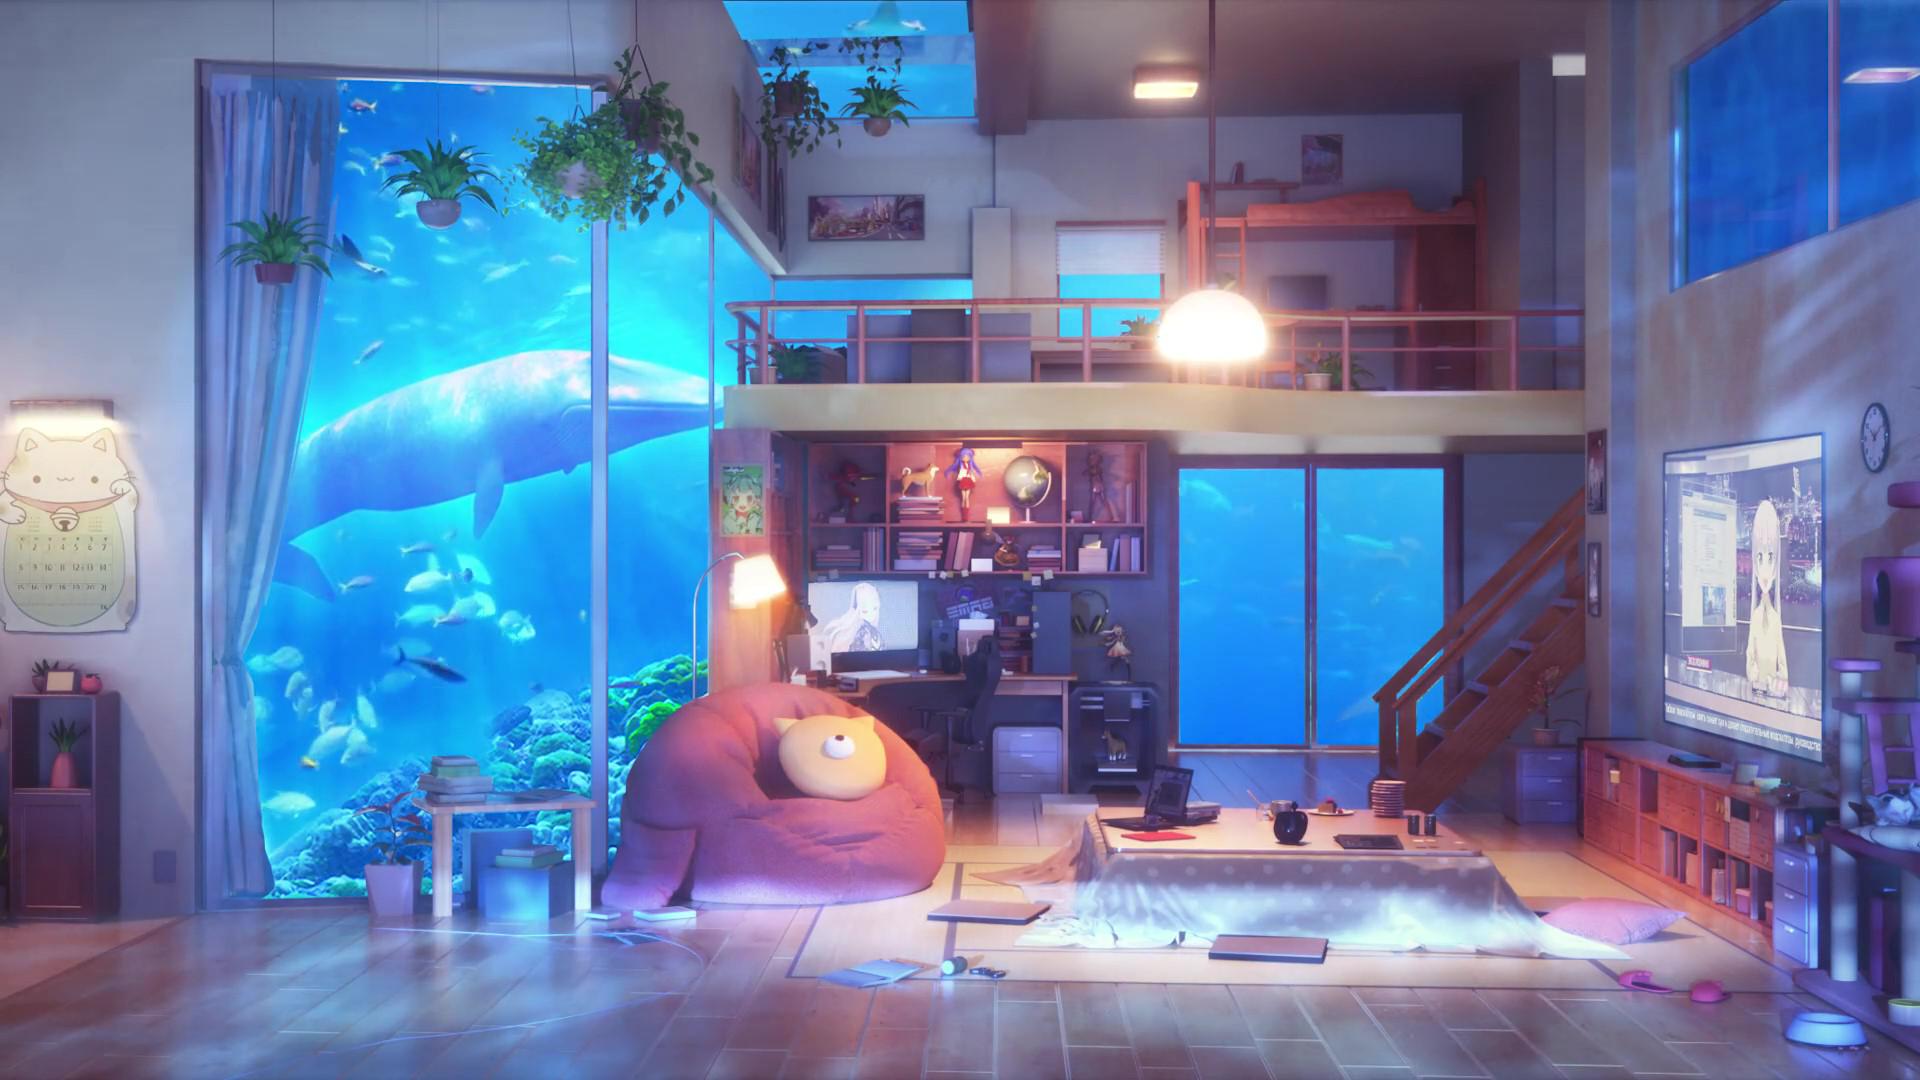 5 Magical Looking Interior Designs Inspired by Japanese Anime -  BeautyHarmonyLife